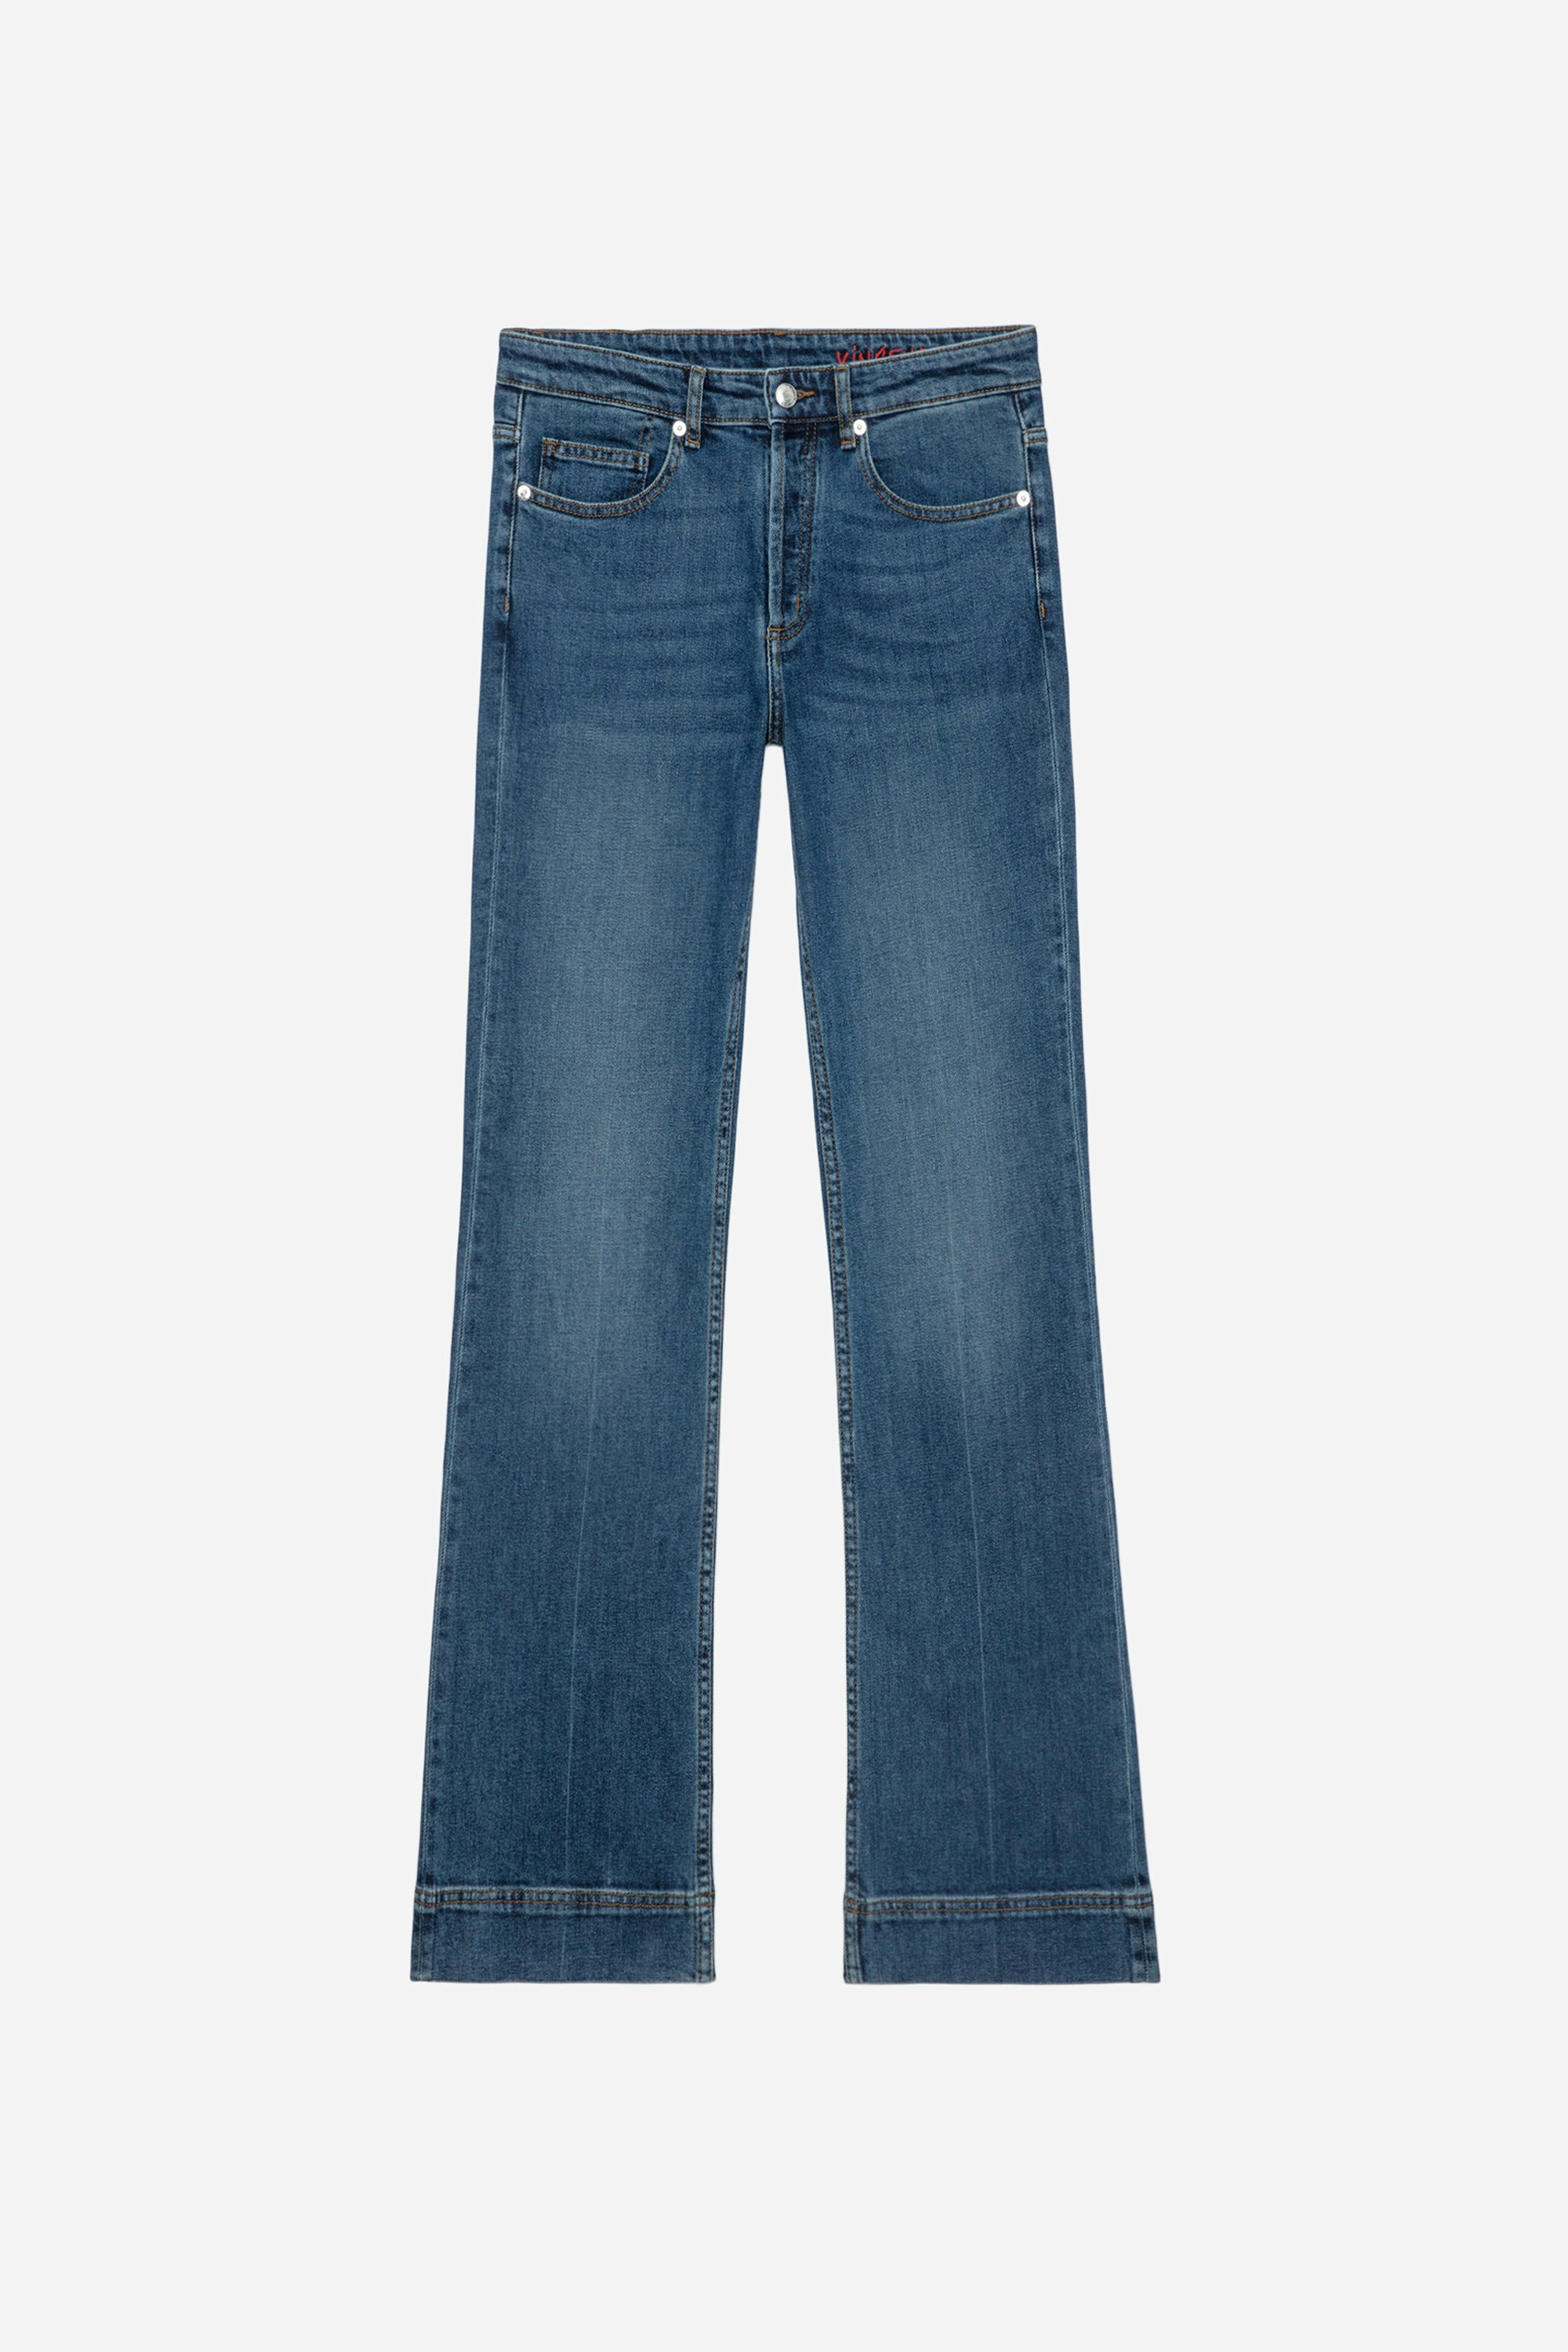 Vincente Jeans - Women's wide denim jeans with flared hem and "Vincente" embroidery.